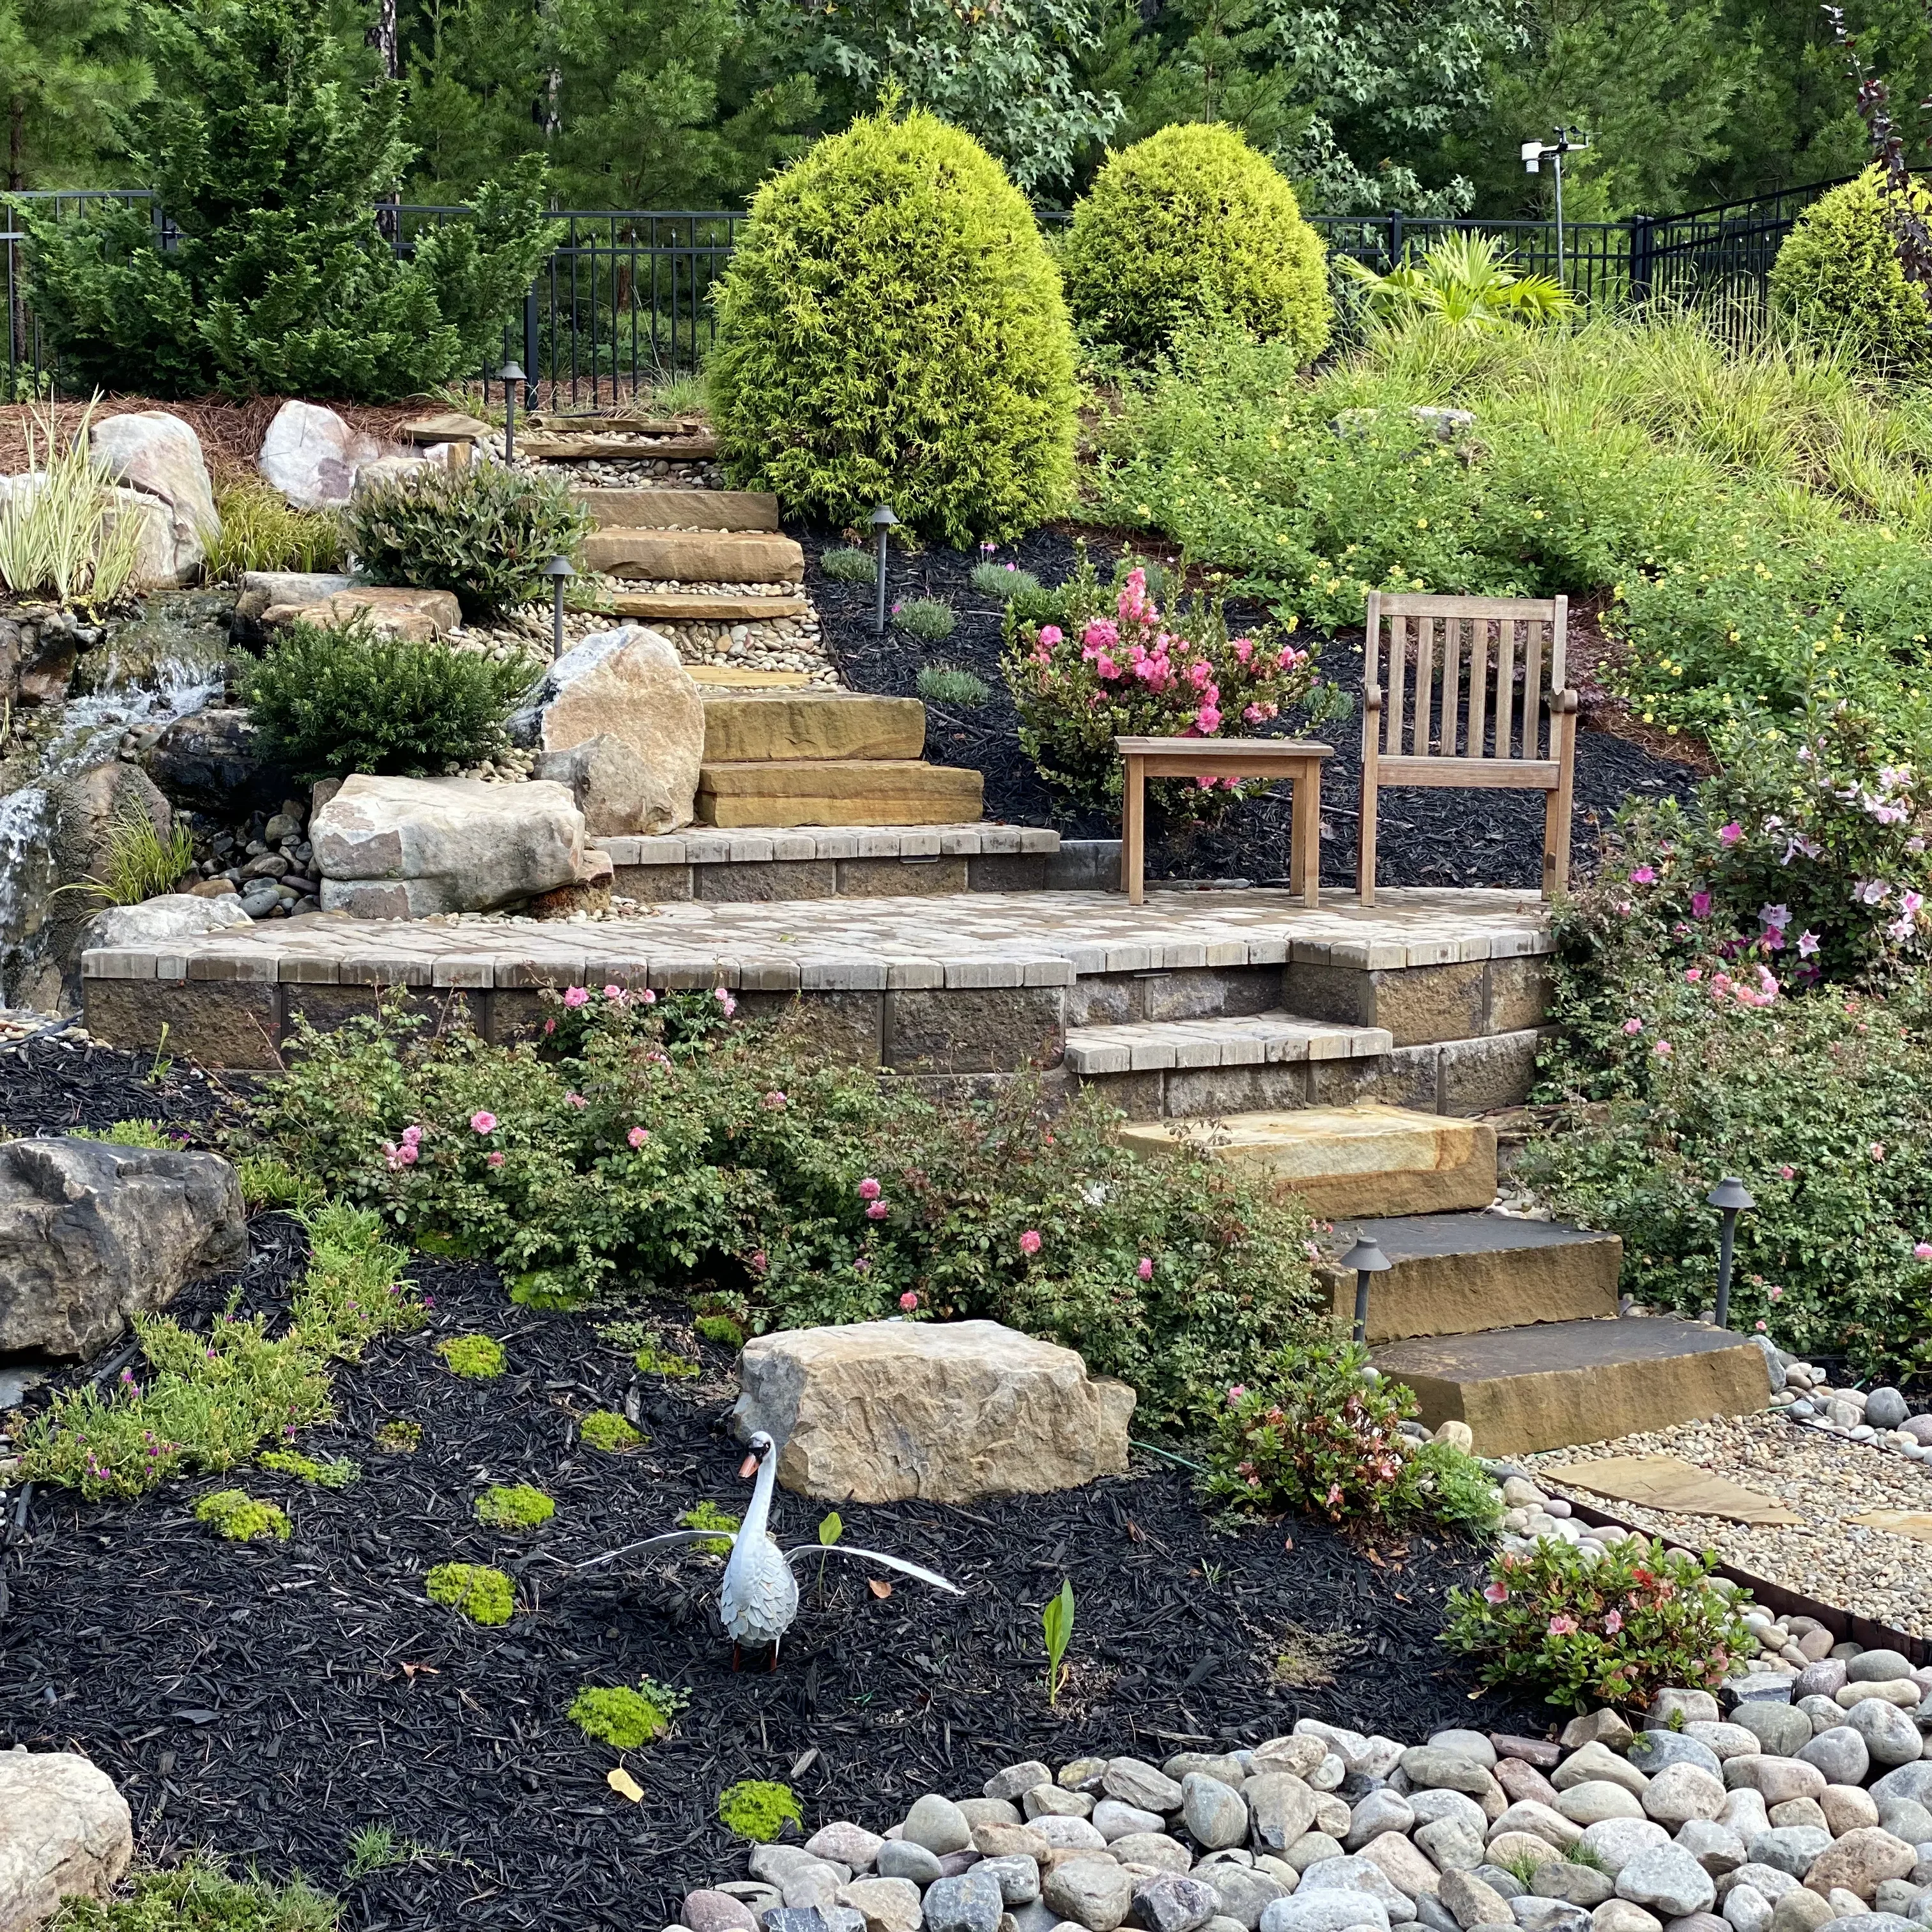 Functional outdoor space with retaining stone walls.